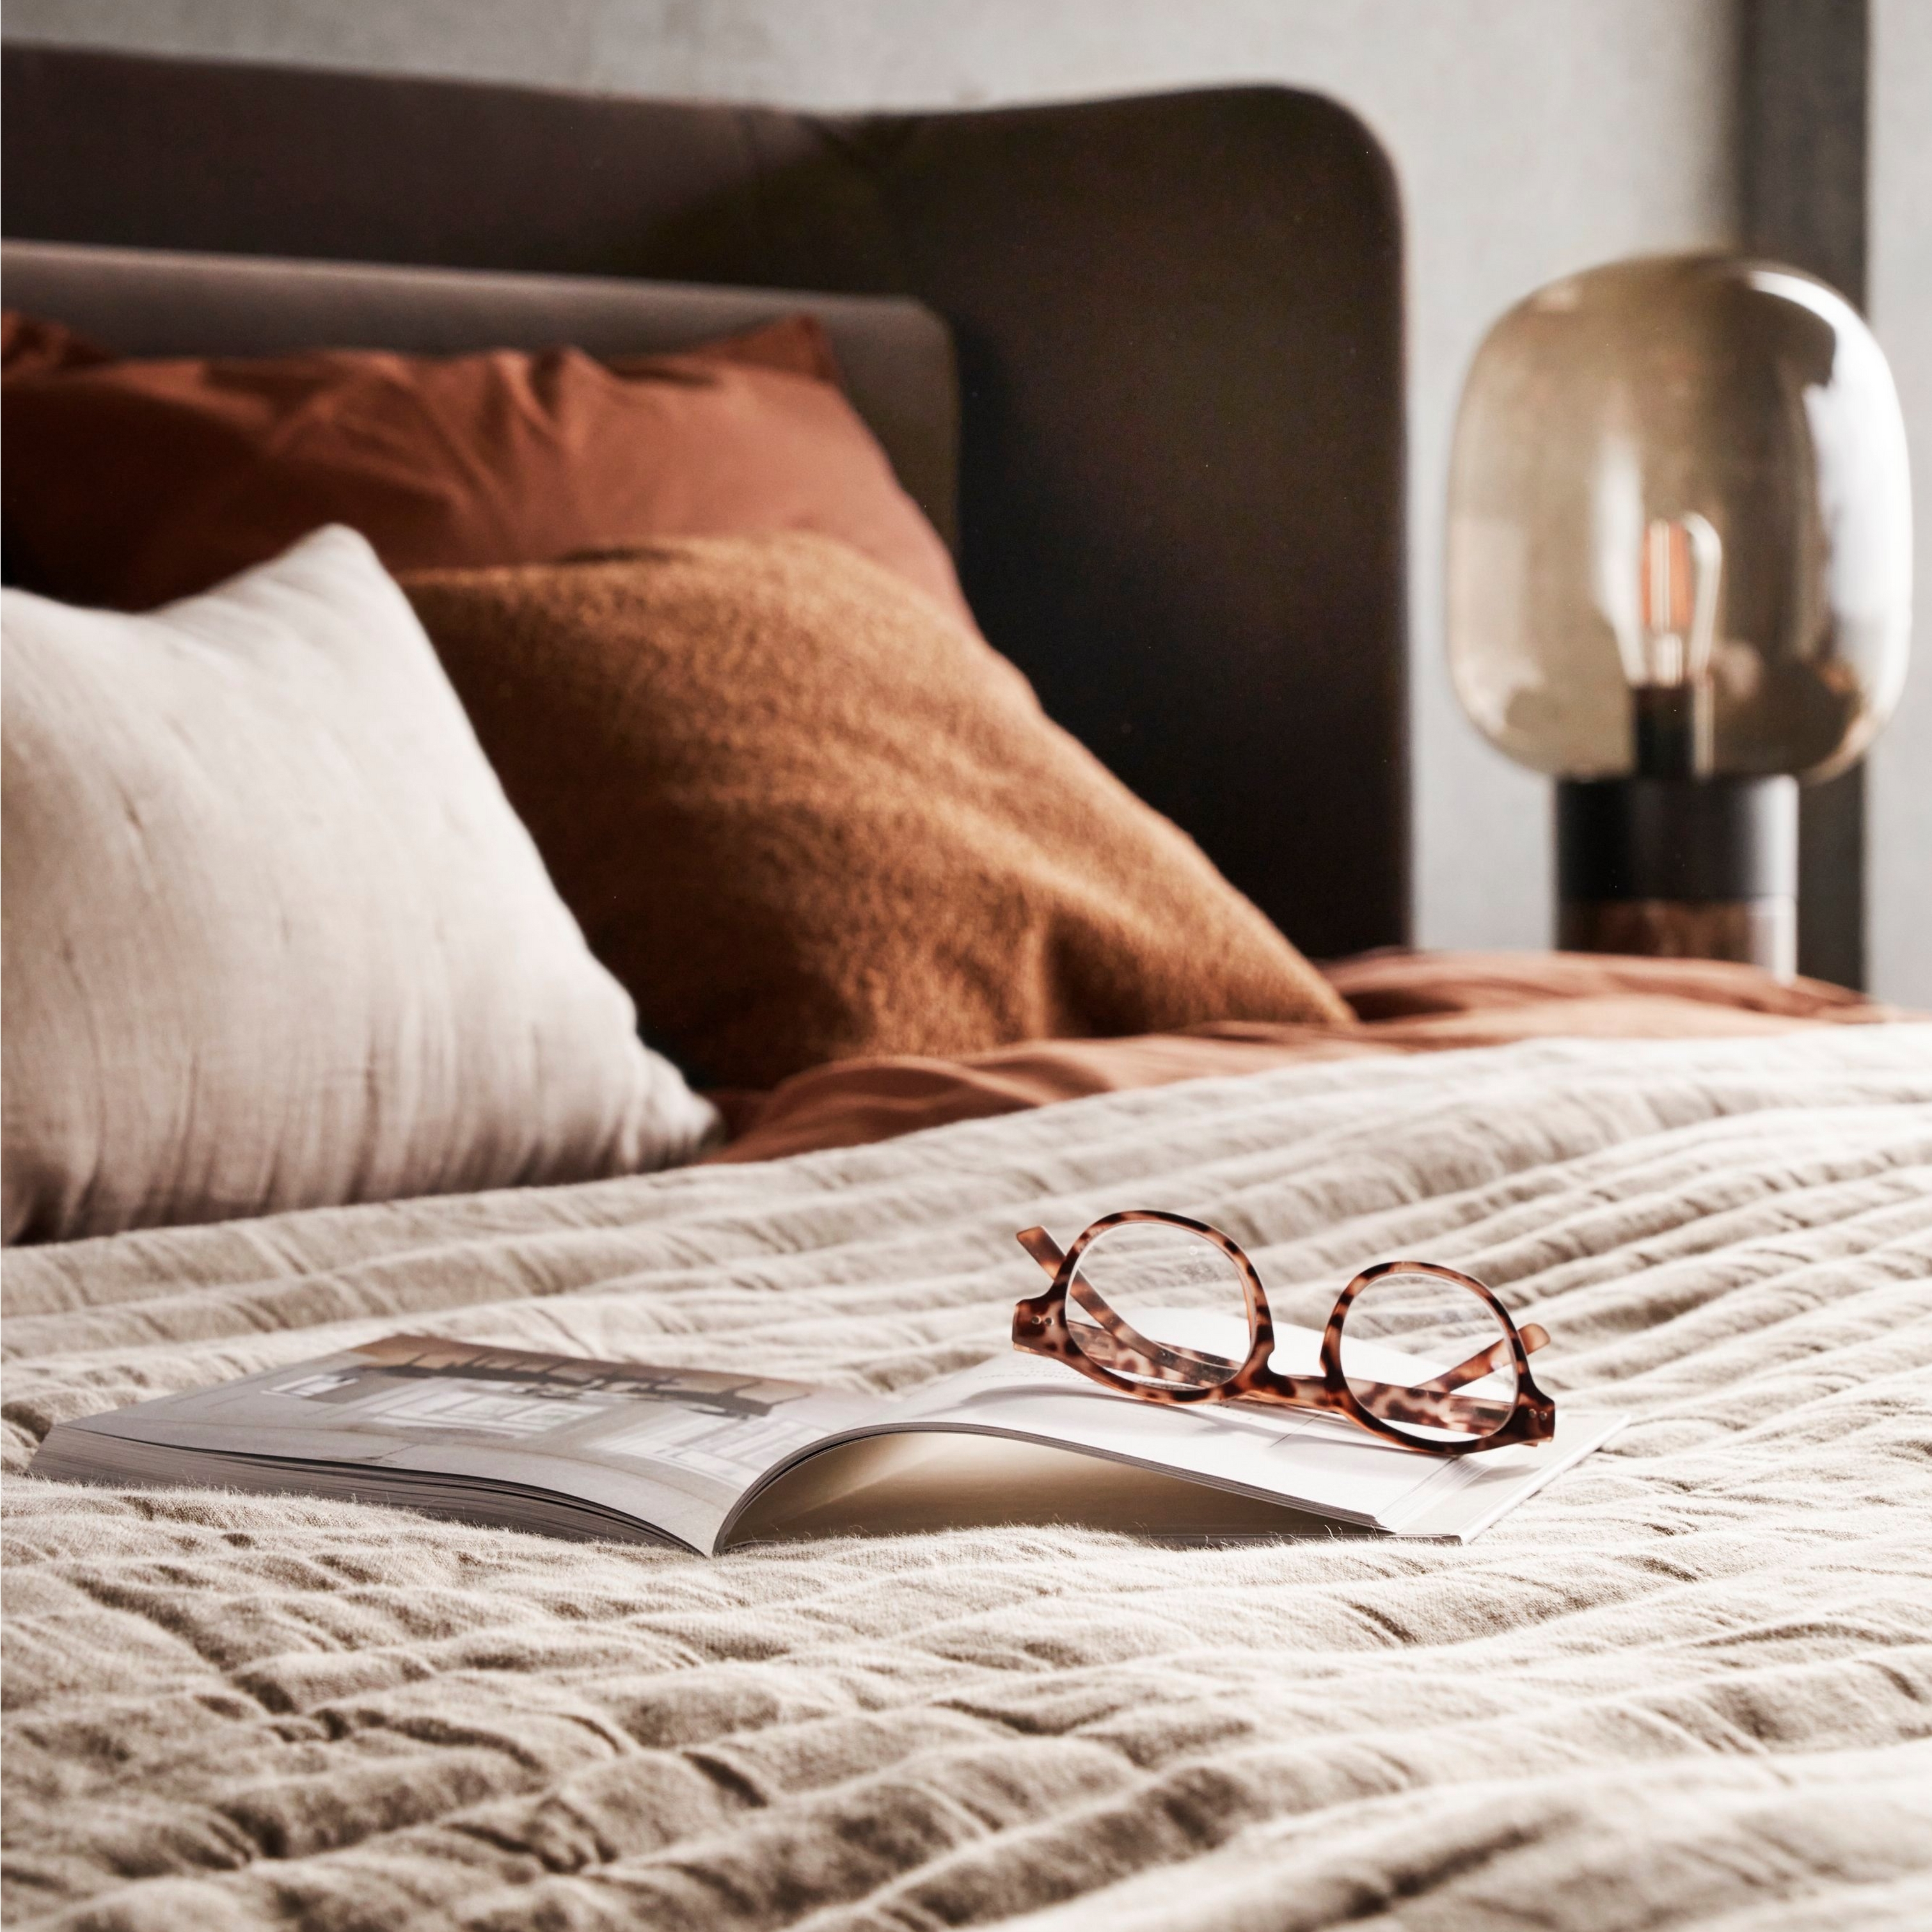 Bed with textured linens, glasses on open book, and soft bedside lighting.